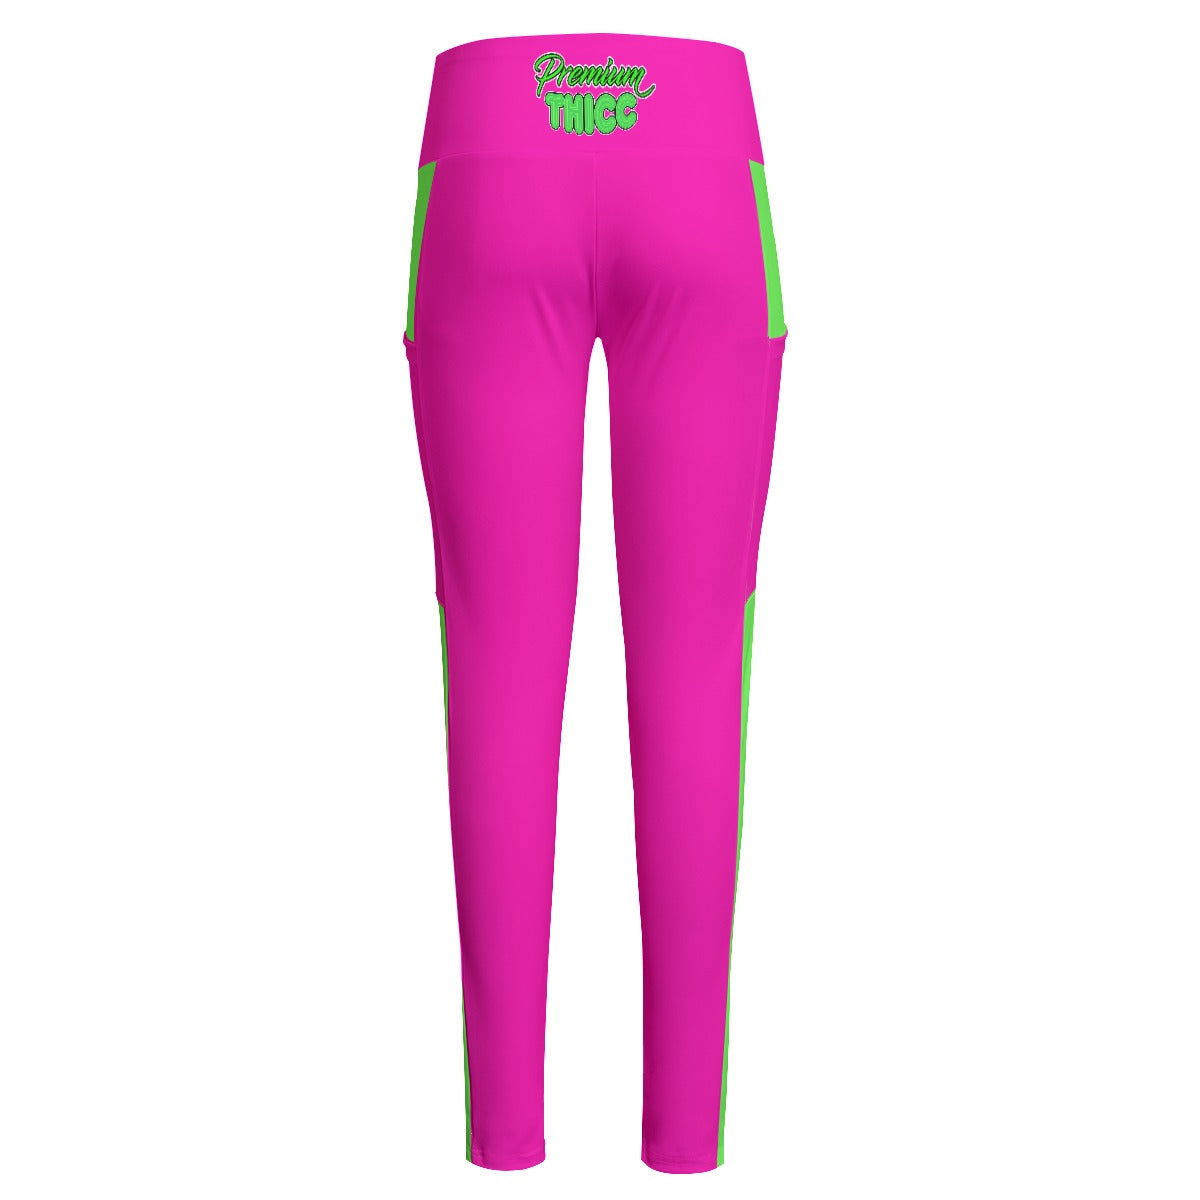 Passion Fruit and Lime Premium Thicc High Waist Leggings With Side Pocket